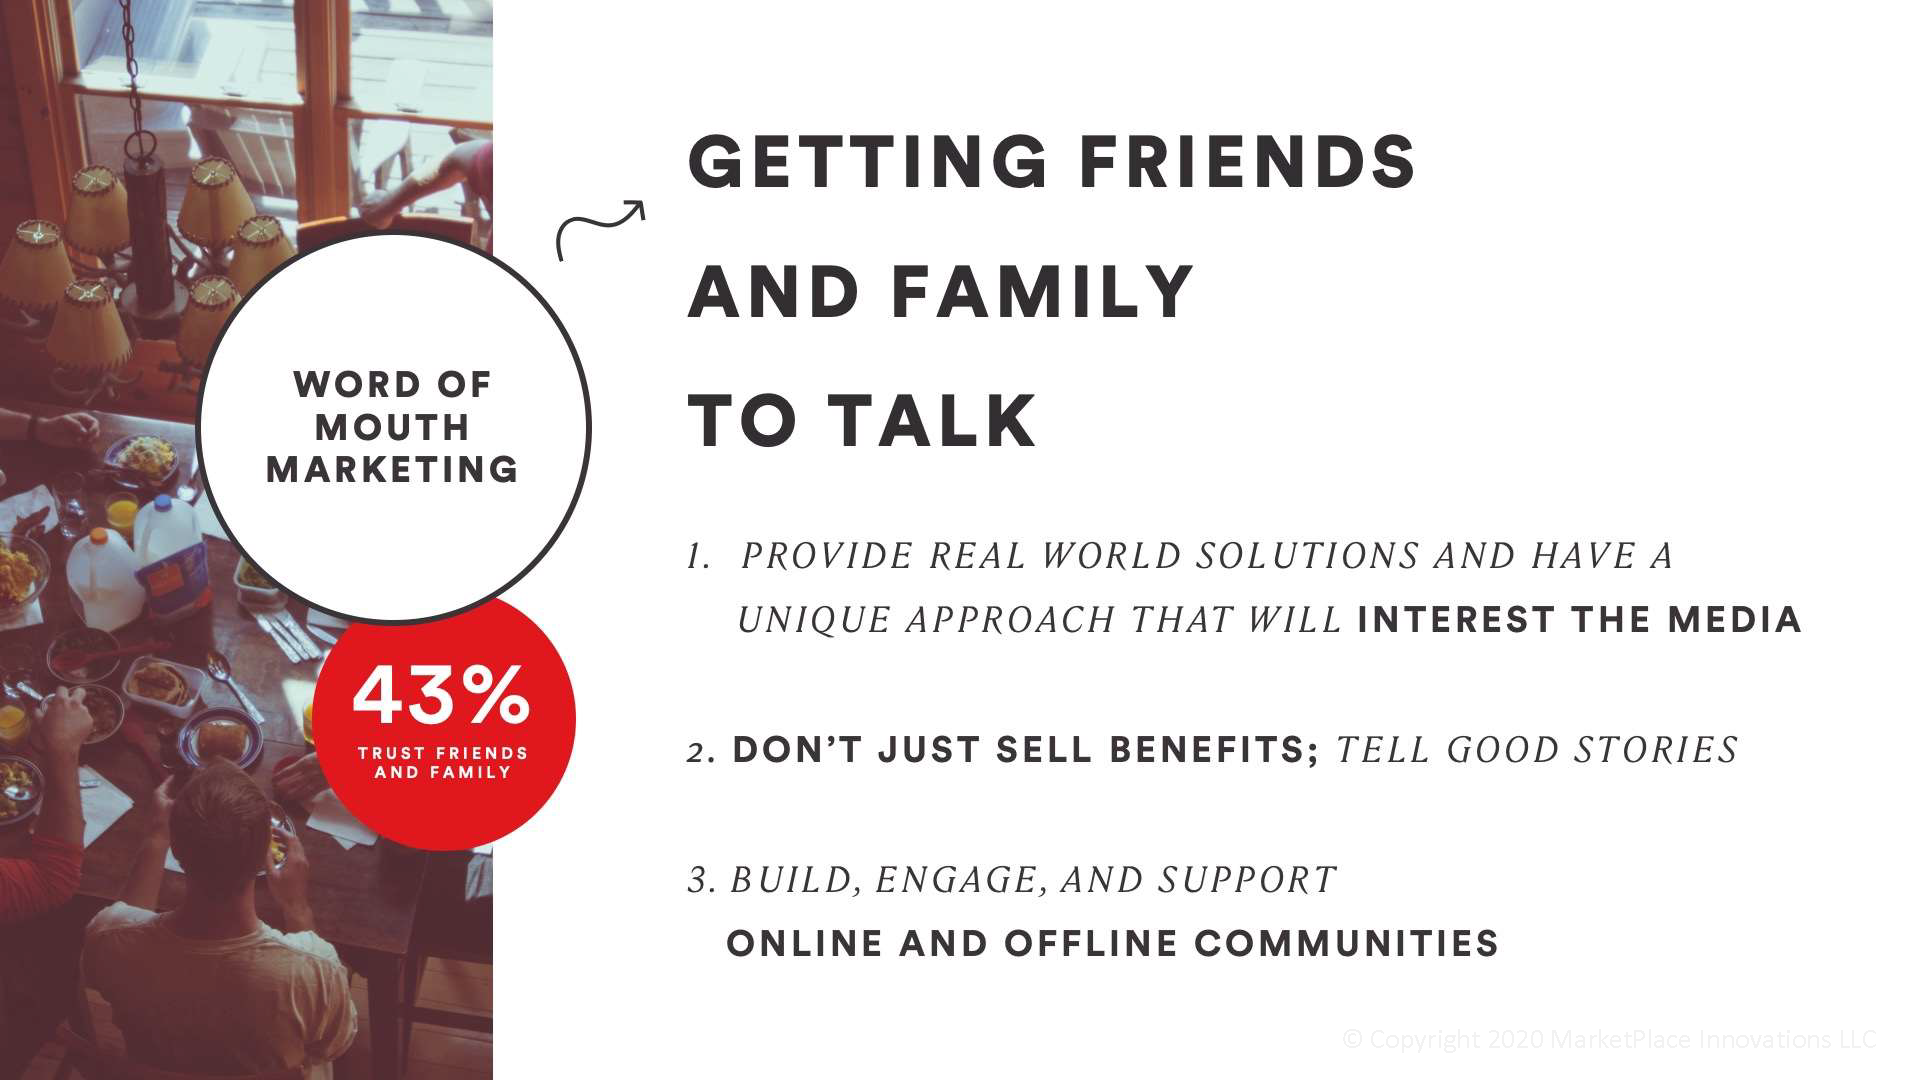 getting friends and family to talk - health and wellness trends